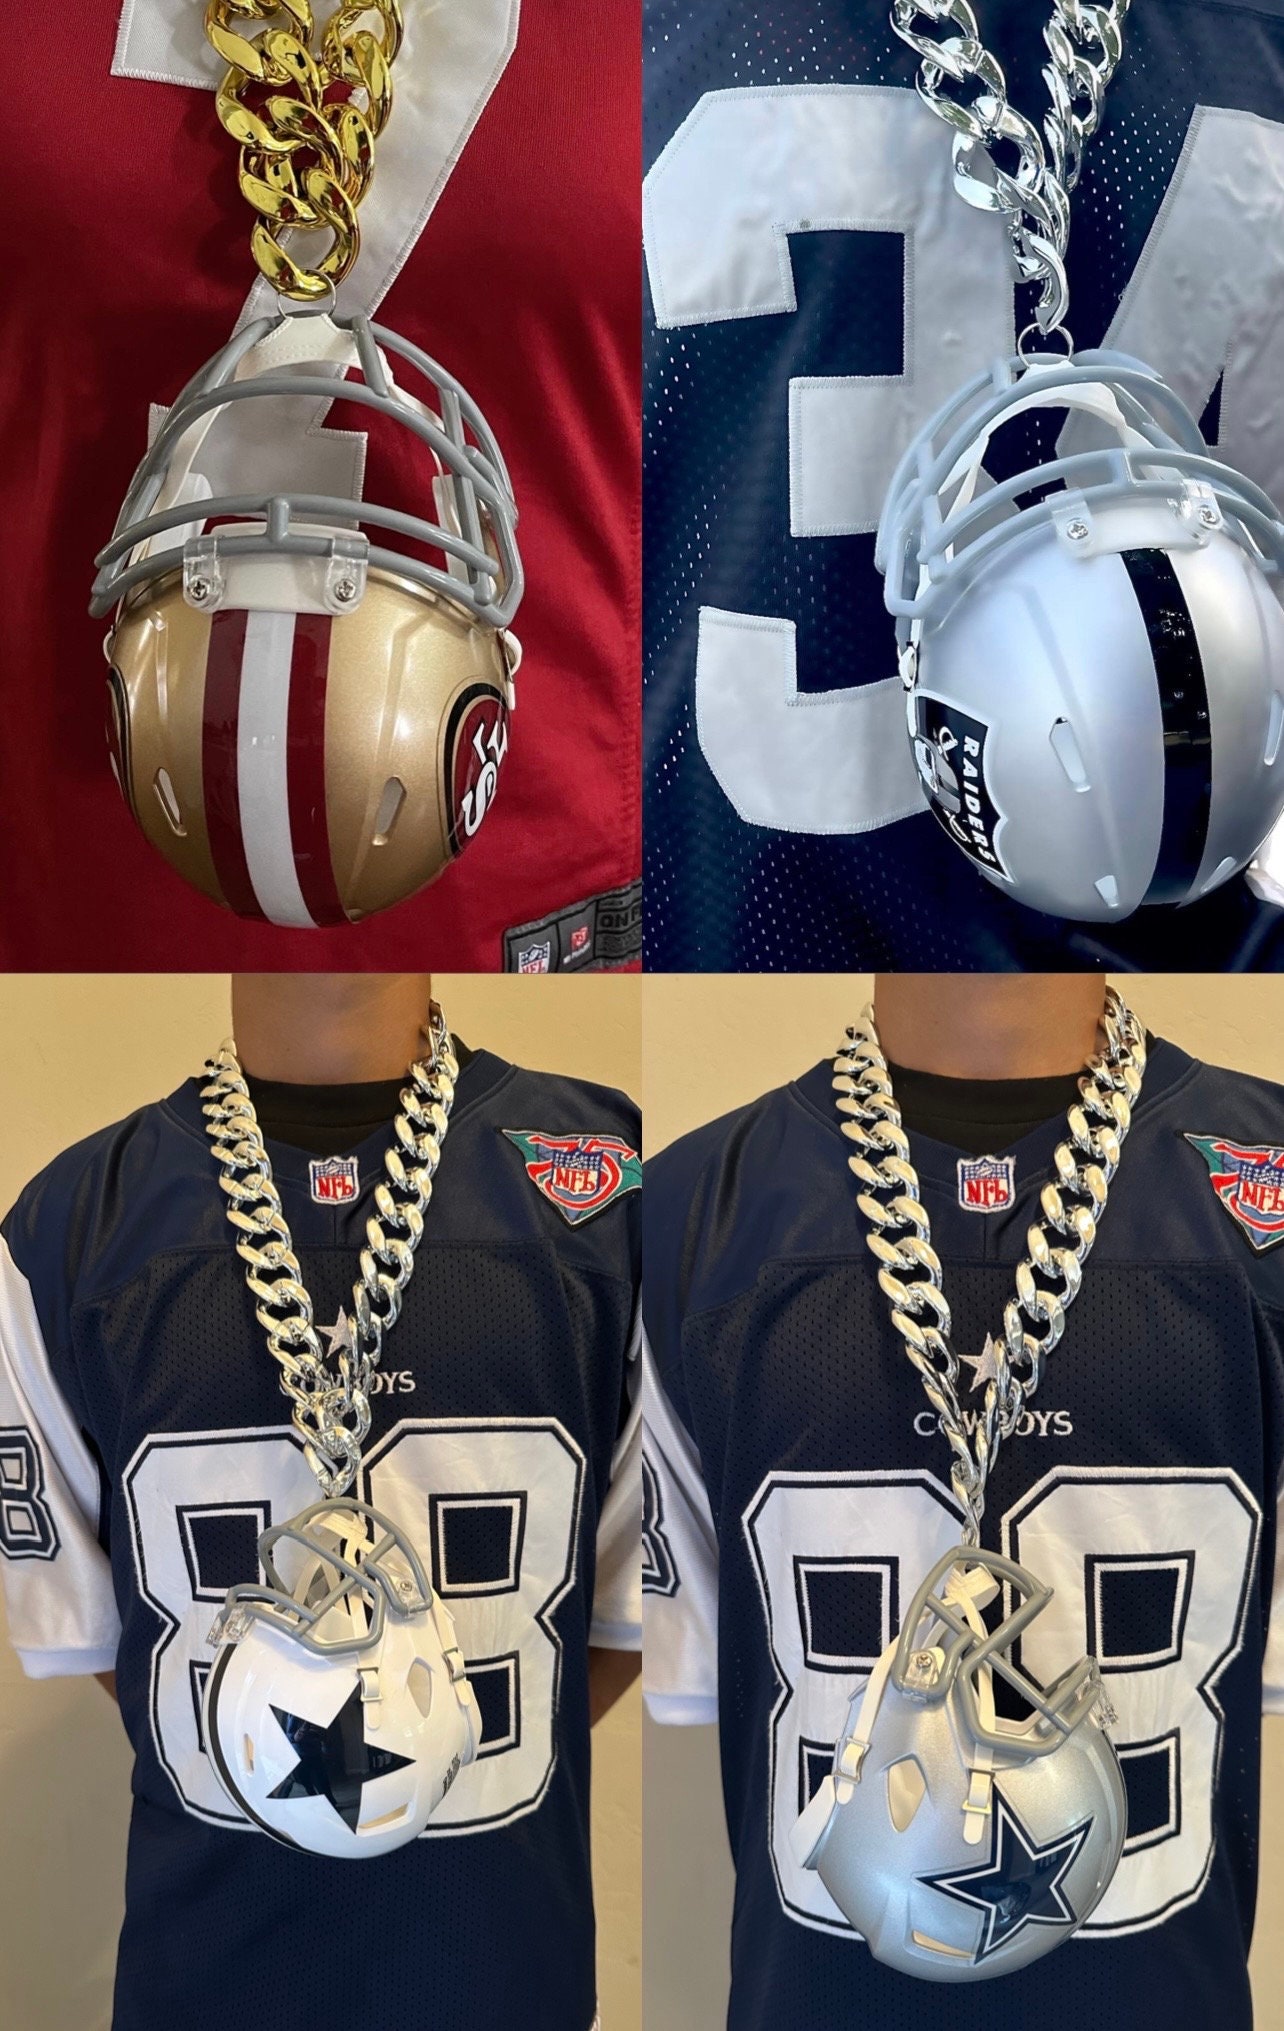 Dallas Cowboys Fan Chain, Giant Necklace NFL Licensed 705988819919 | eBay